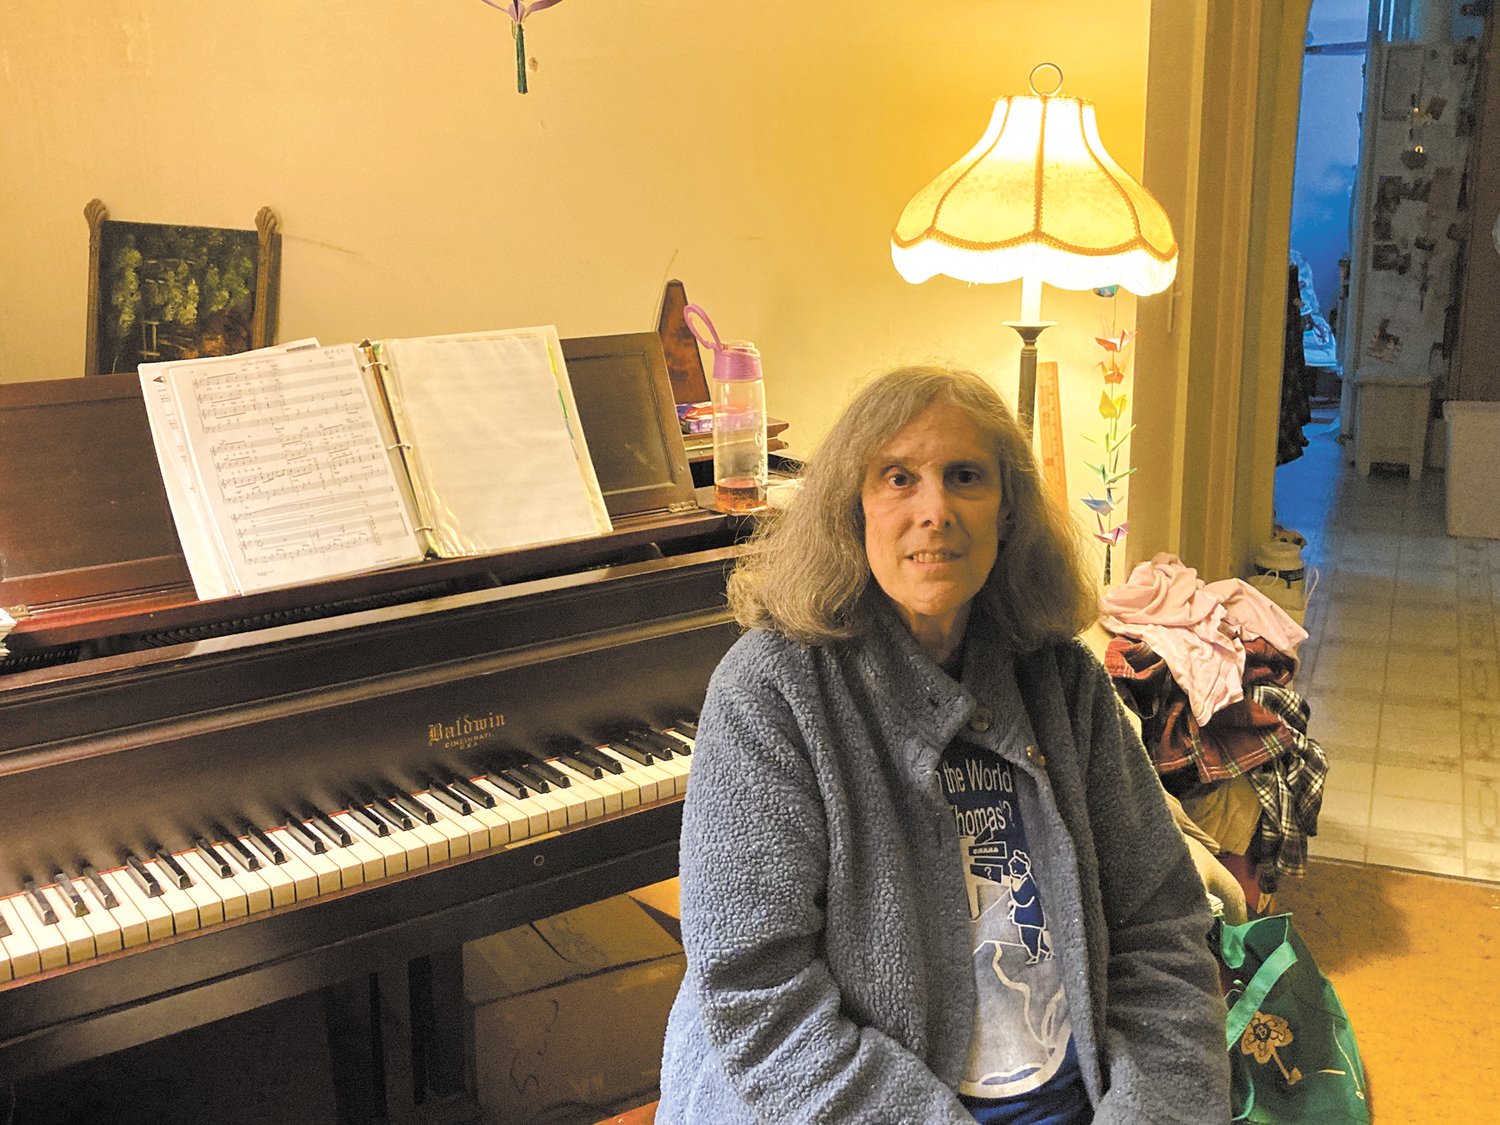 BACK HOME IN CHEPACHET: Kathleen Wikstrom sits at her piano at her Chepachet home. She started teaching piano at age 14 and went on to earn a degree in electrical-mechanical engineering from the New England Institute of Technology. She also spent time as a first responder, playing piano for churches and teaching piano and voice. (Herald photo)